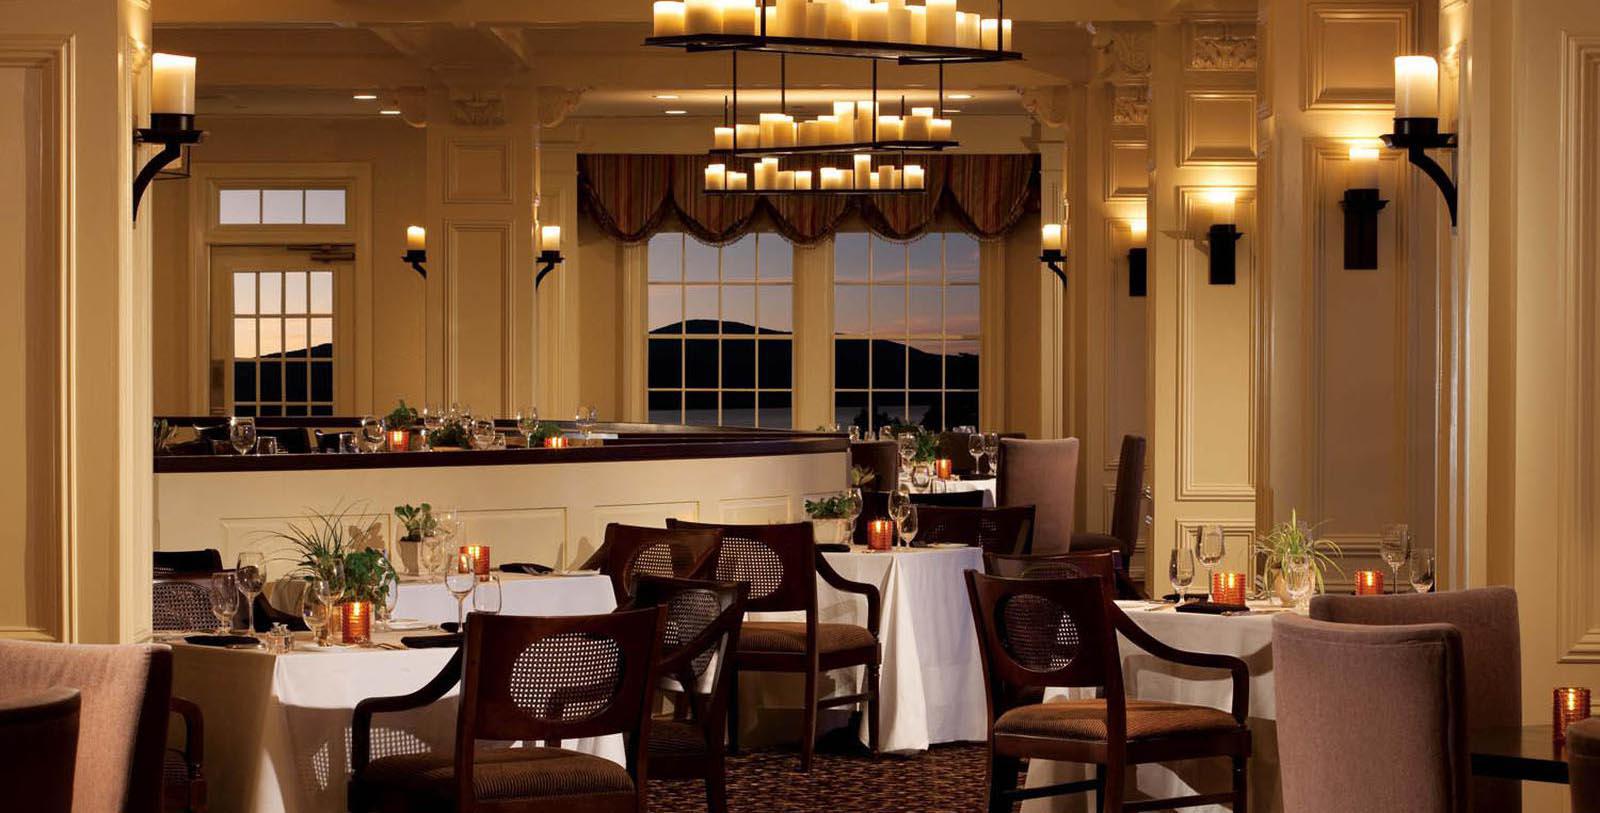 Taste Old World flair at the Club Grill Steakhouse.